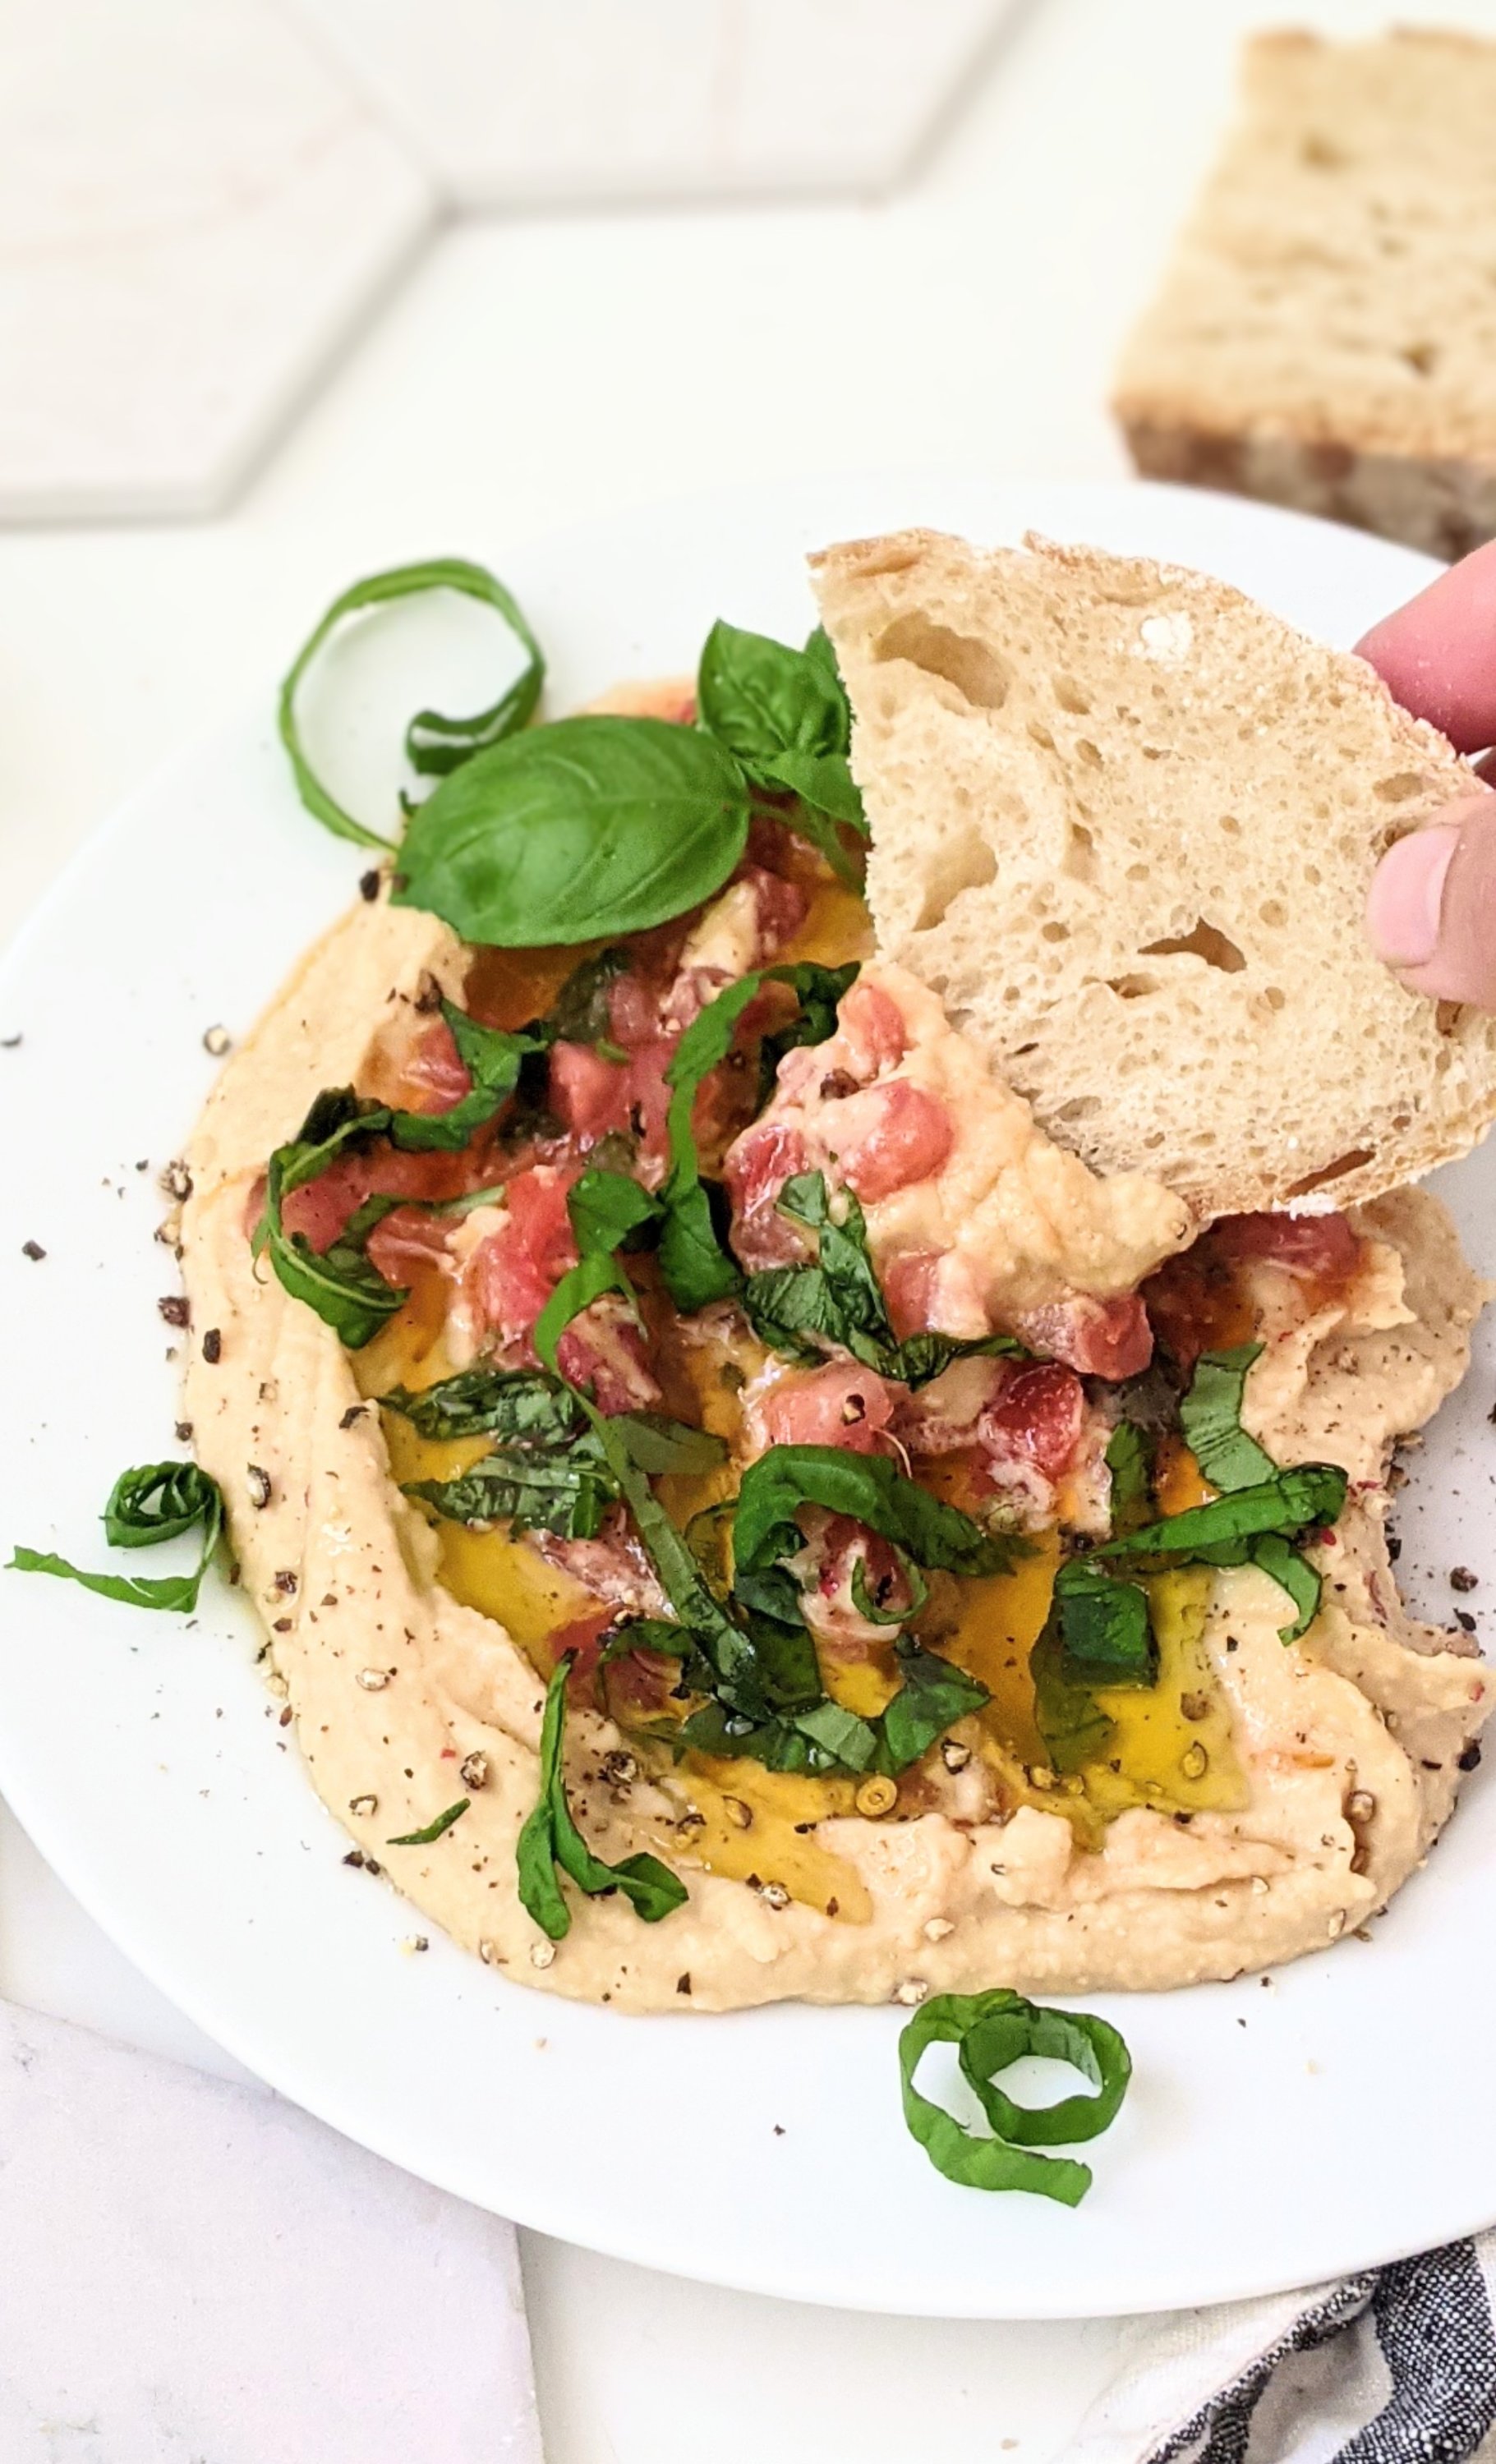 easy gluten free humus with bruschetta recipe vegan no cook sides bbq summer recipes without cooking appetizers healthy food easy party dip plant based